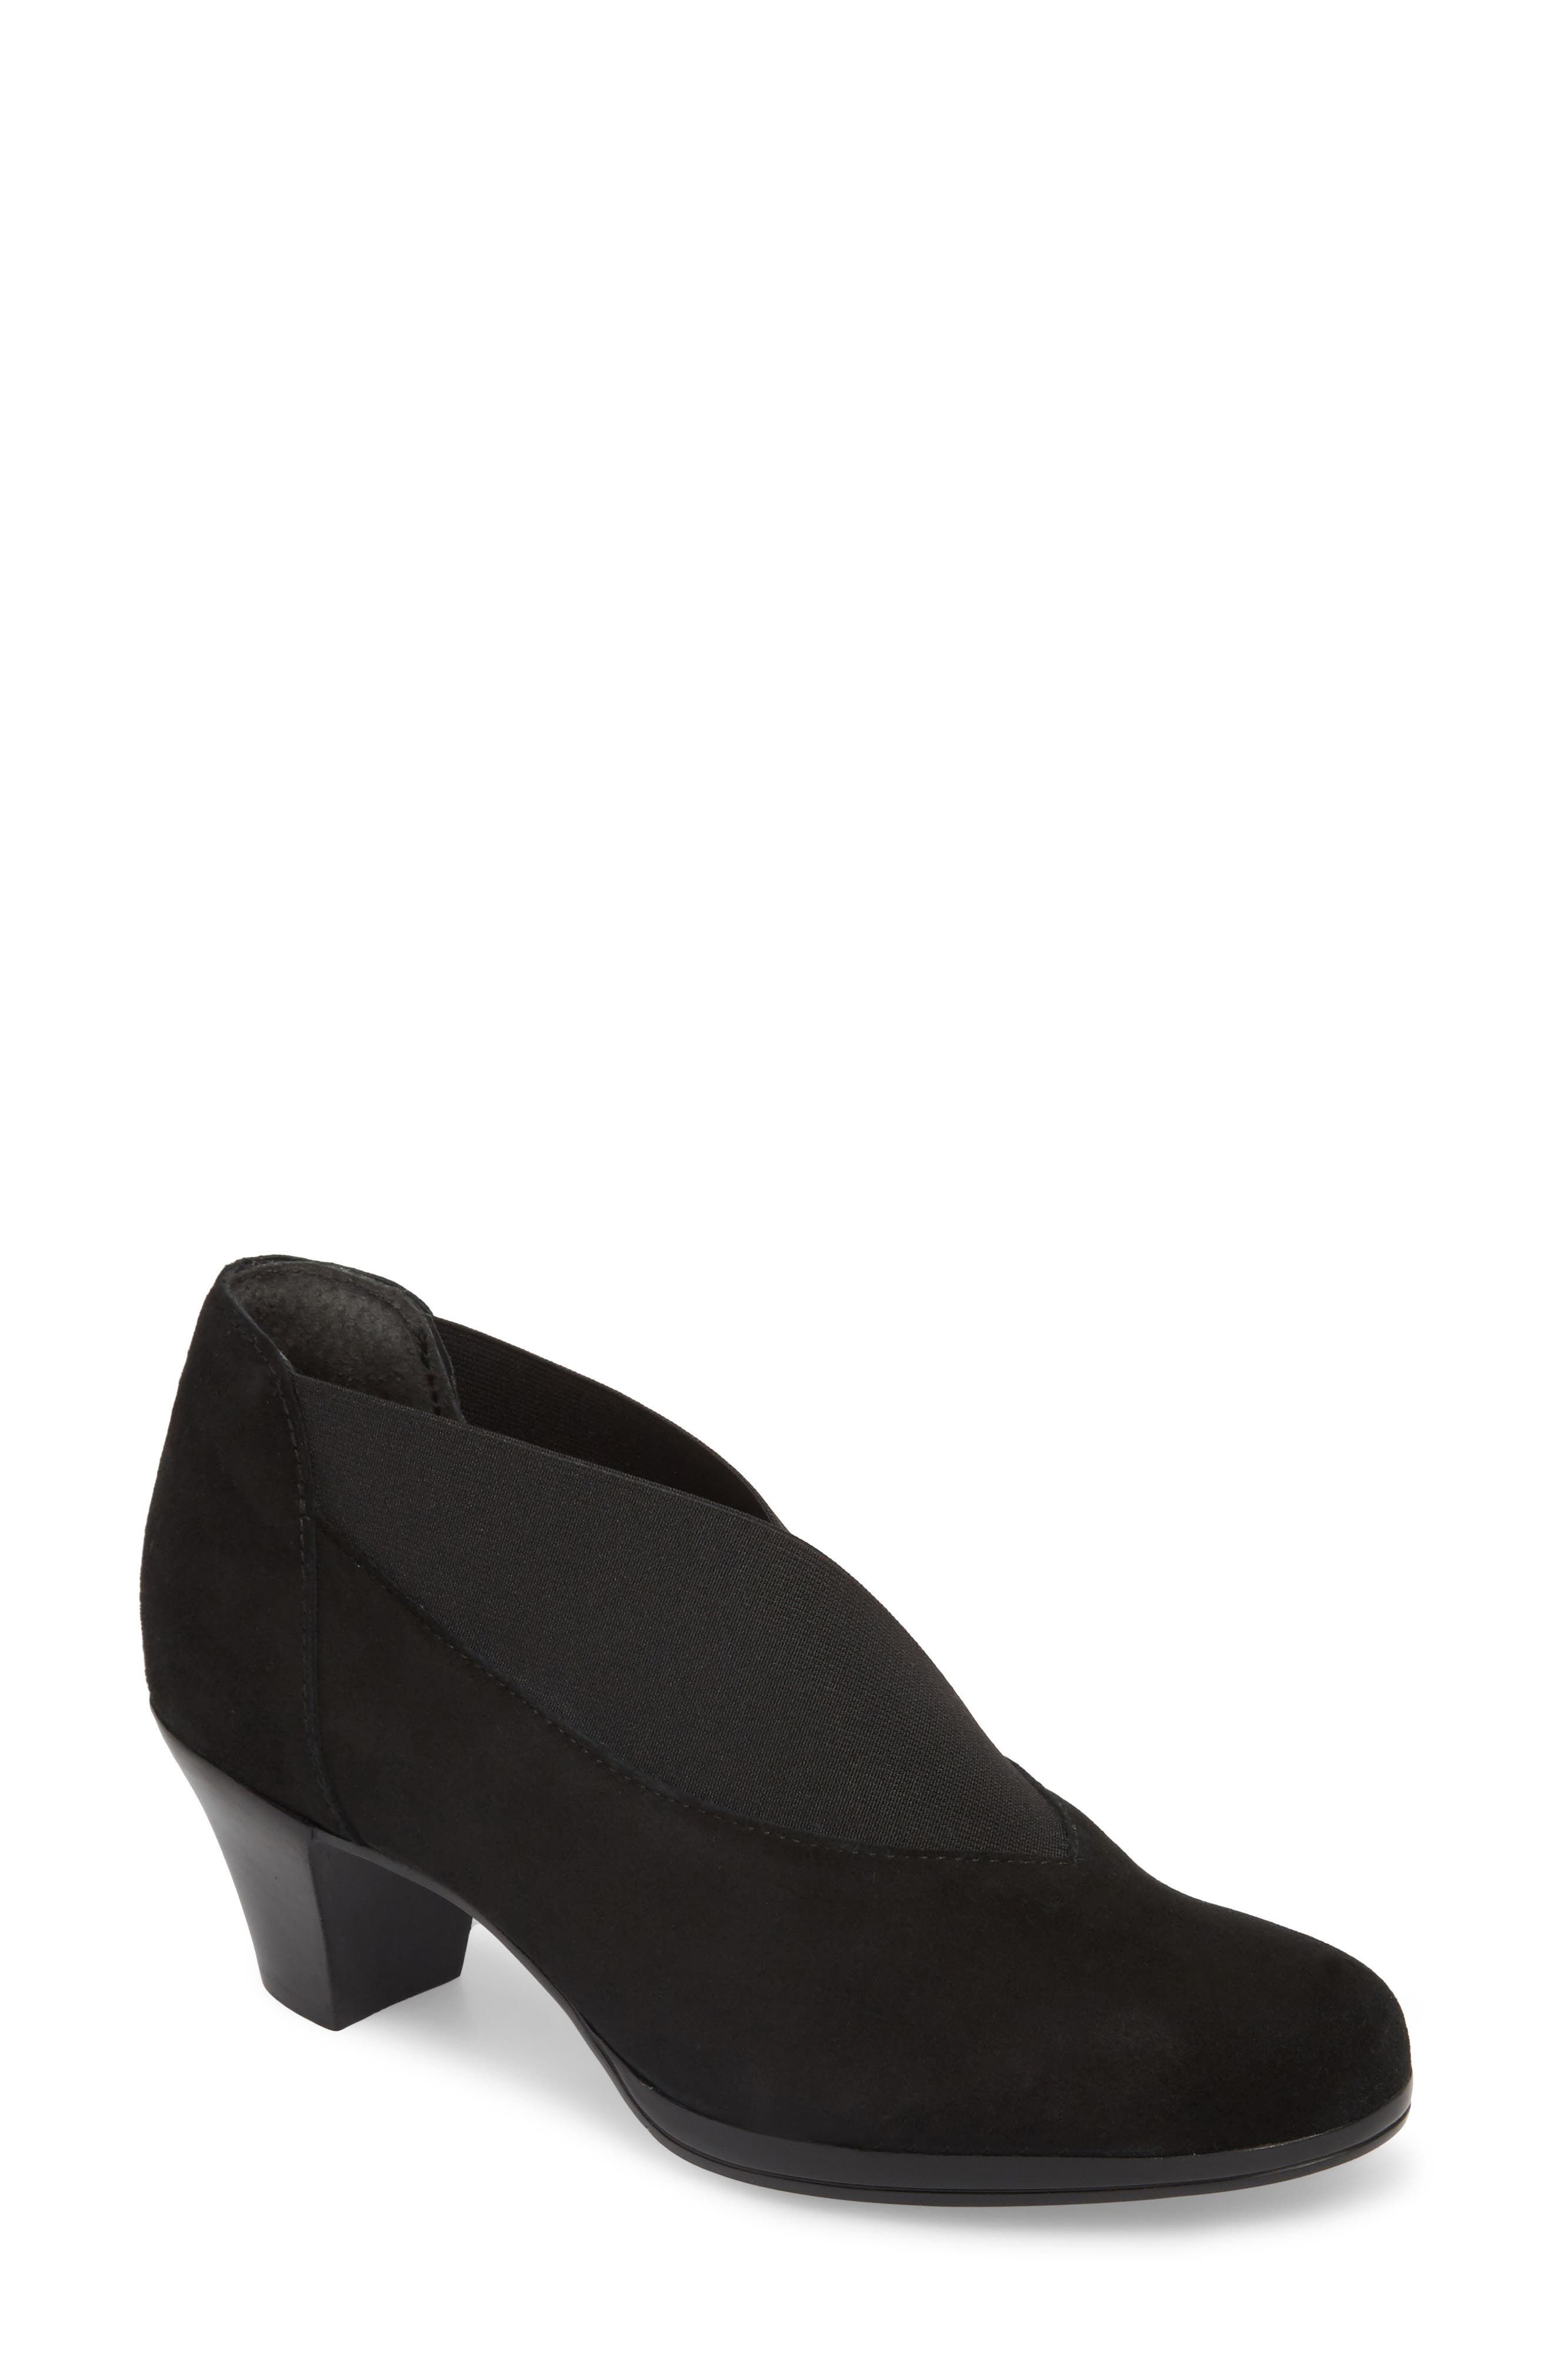 nordstrom anniversary sale munro shoes